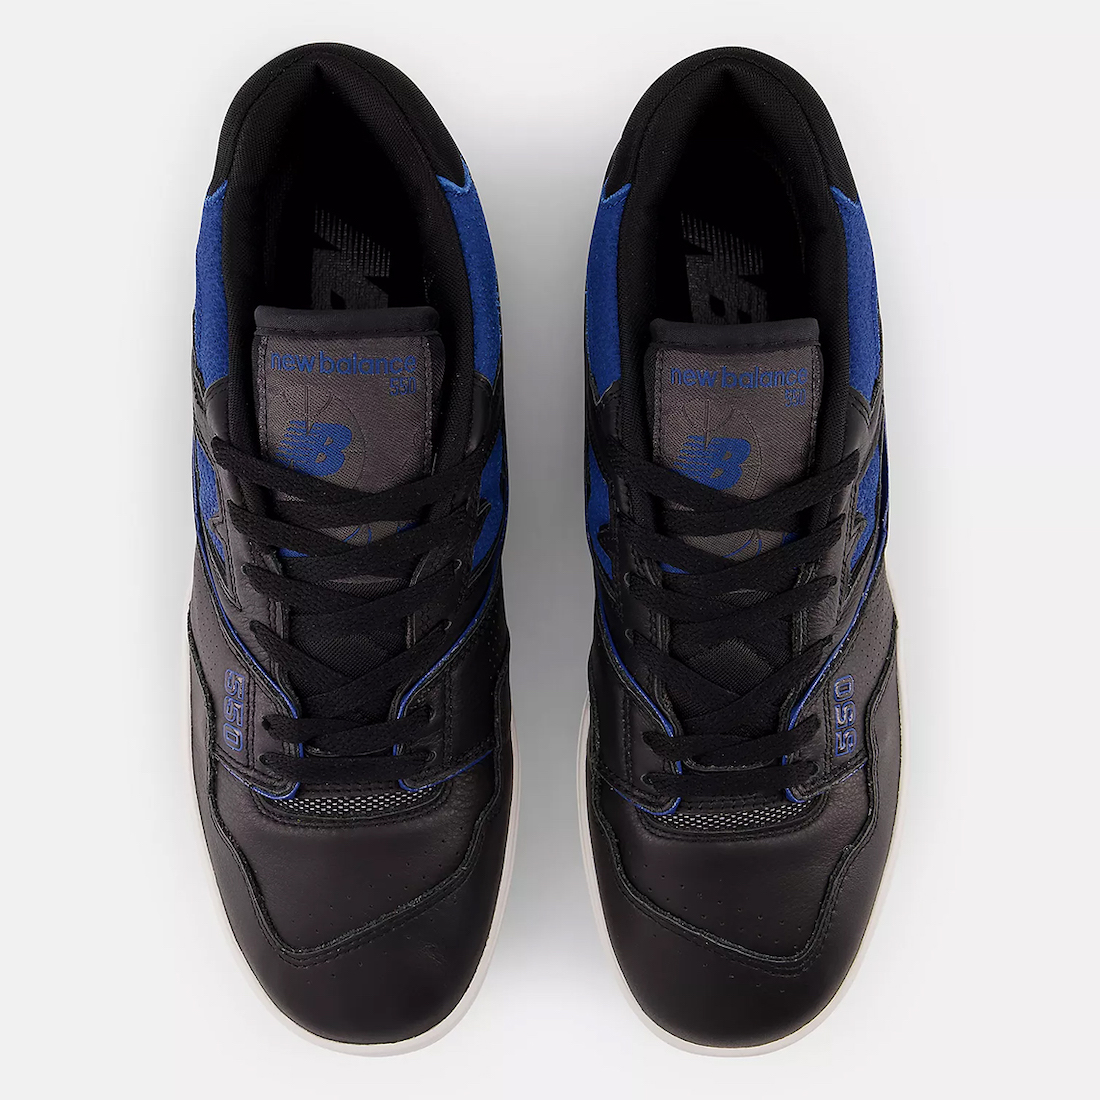 New Balance 550 Black Blue Groove White BB550PLB Release Date